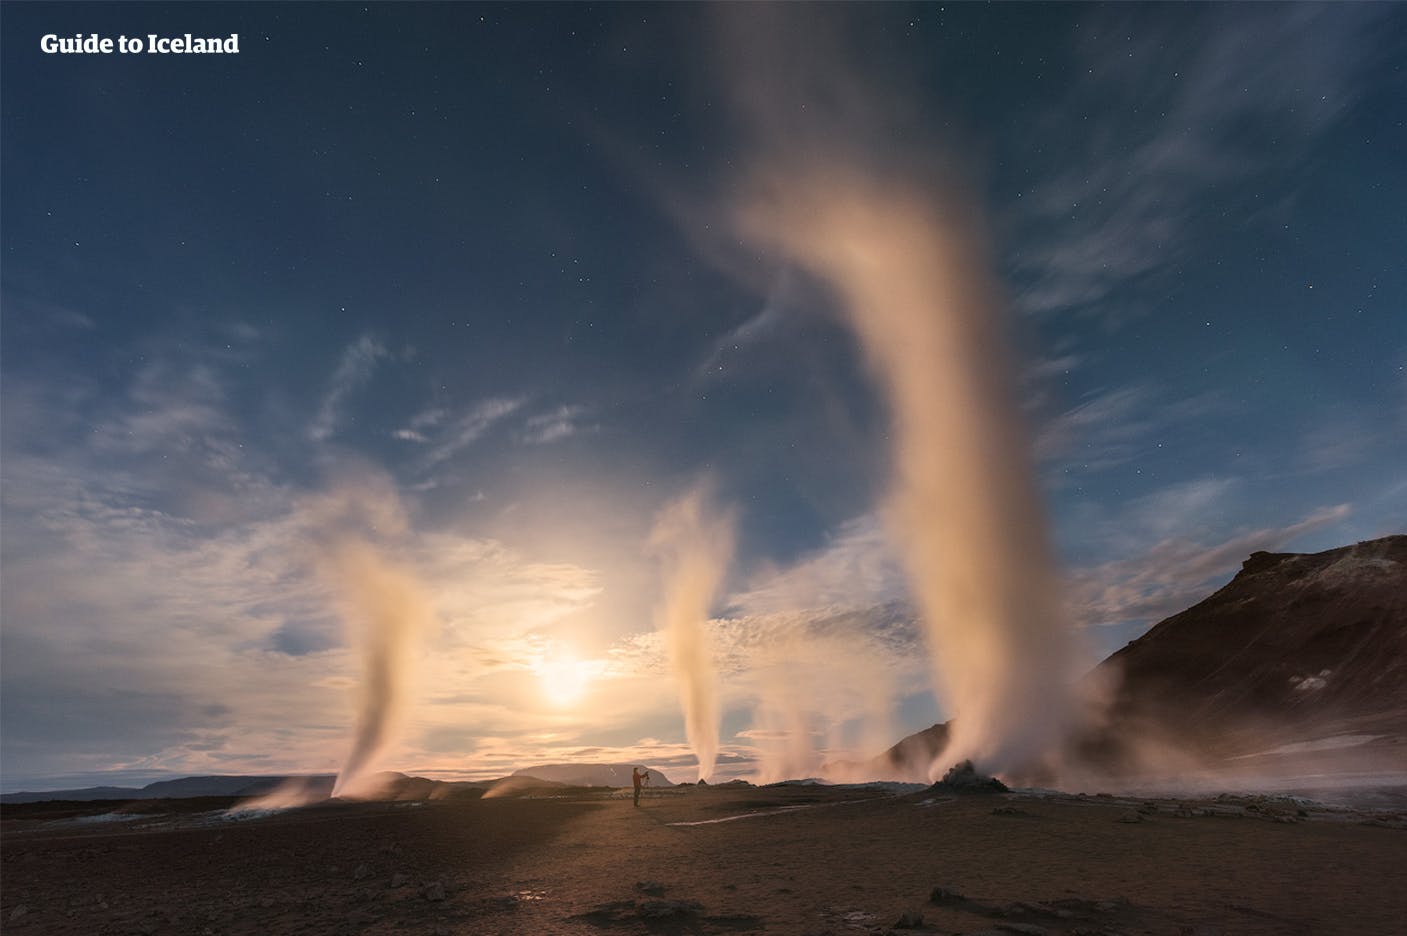 North Iceland is a hotbed of geothermal activity.